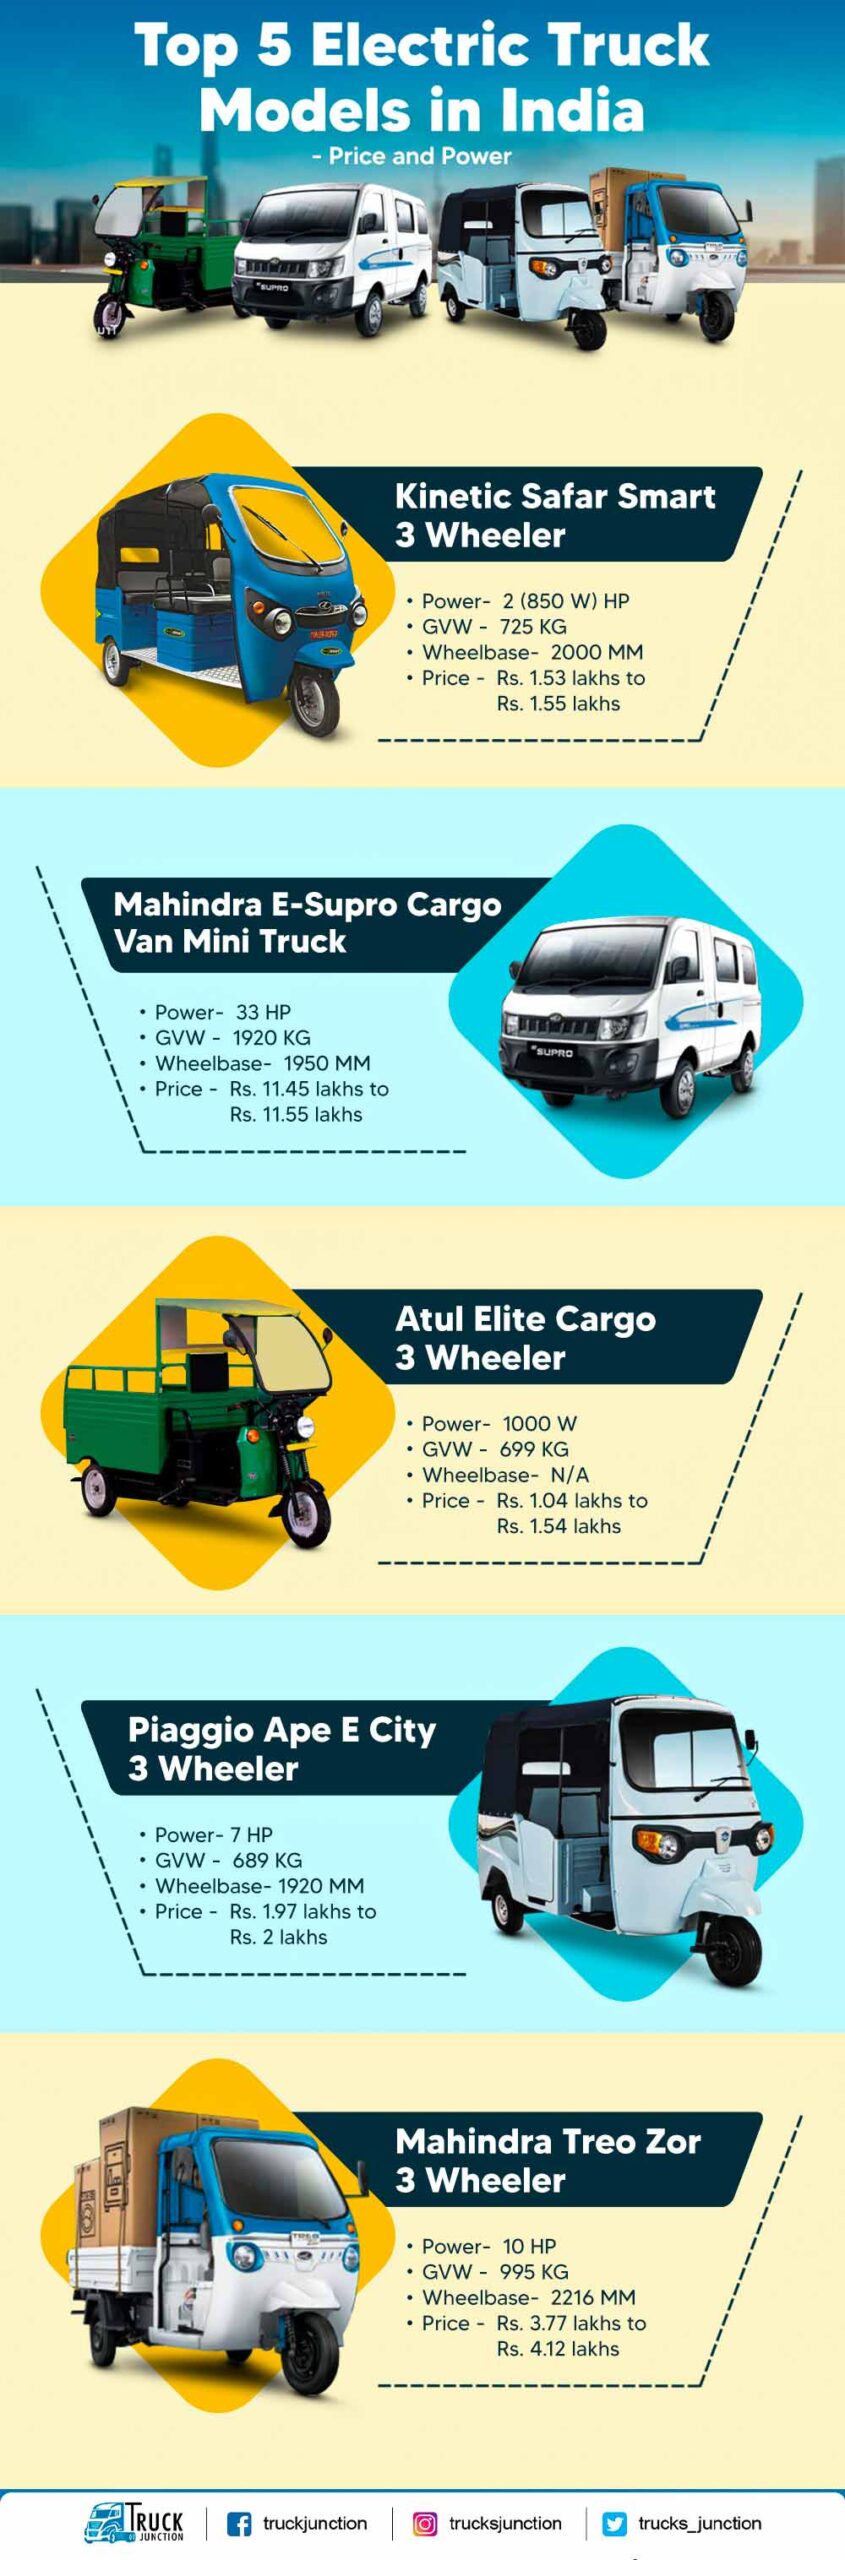 Top 5 Electric Truck Models Infographic